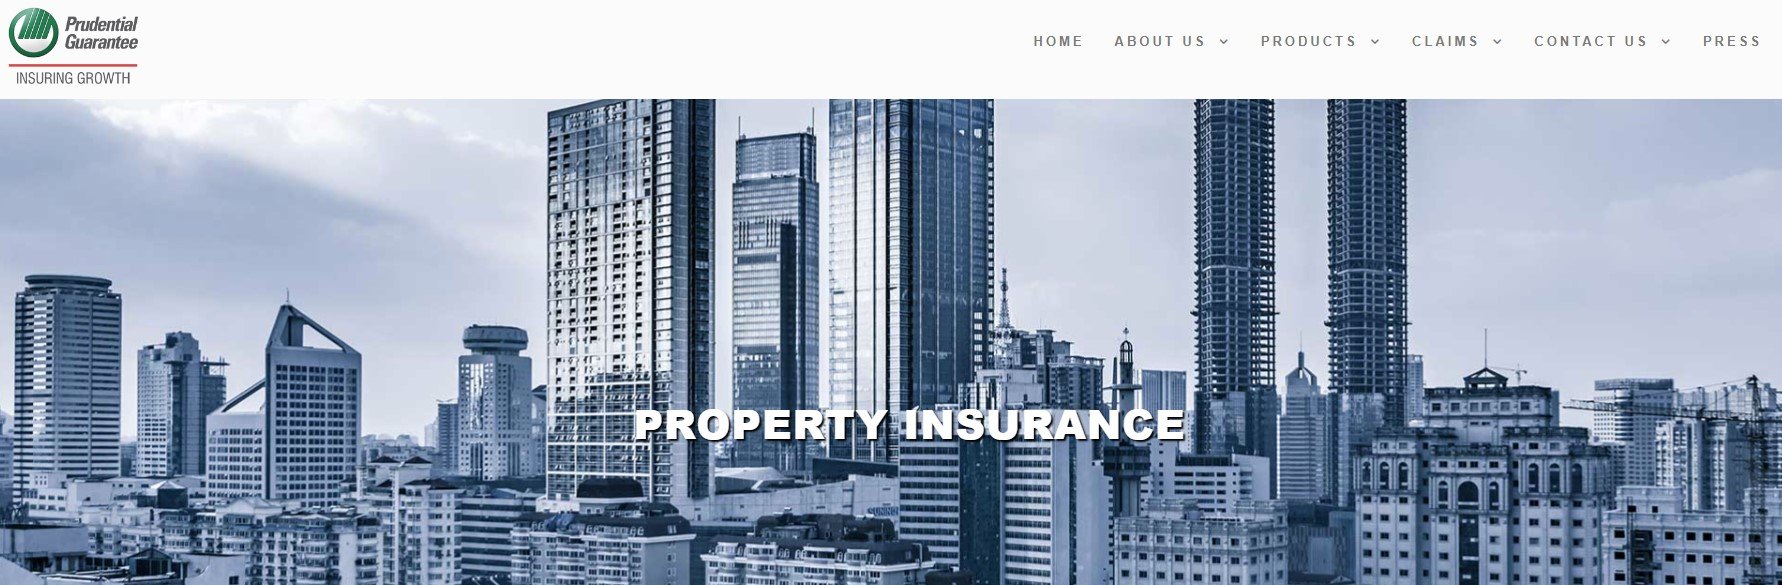 house insurance philippines - Prudential Guarantee Property Insurance